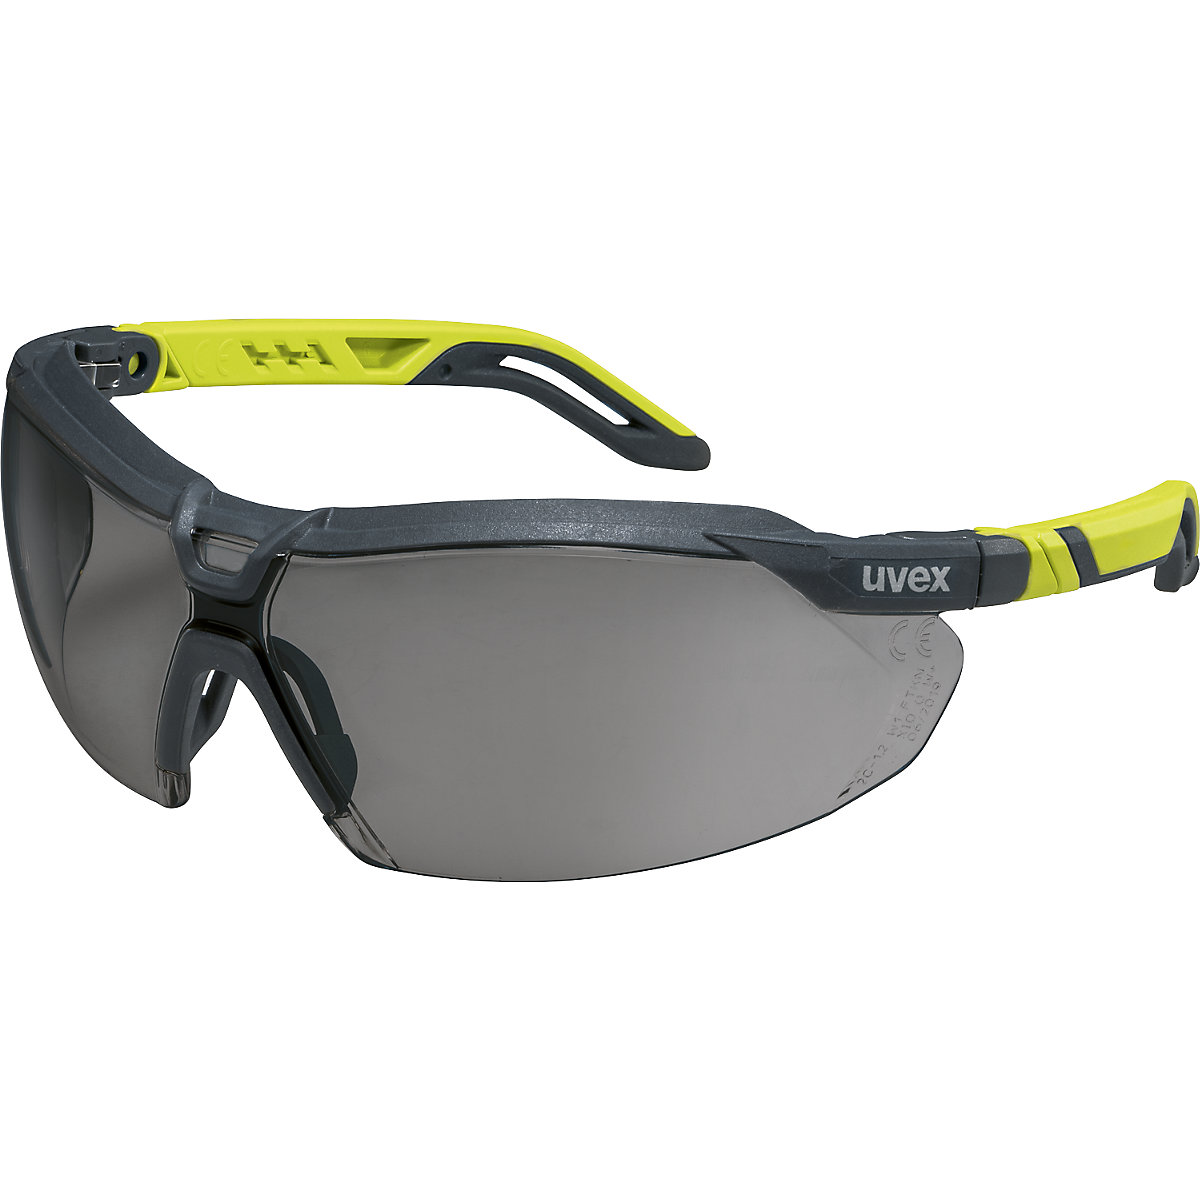 i-Series safety spectacles – Uvex